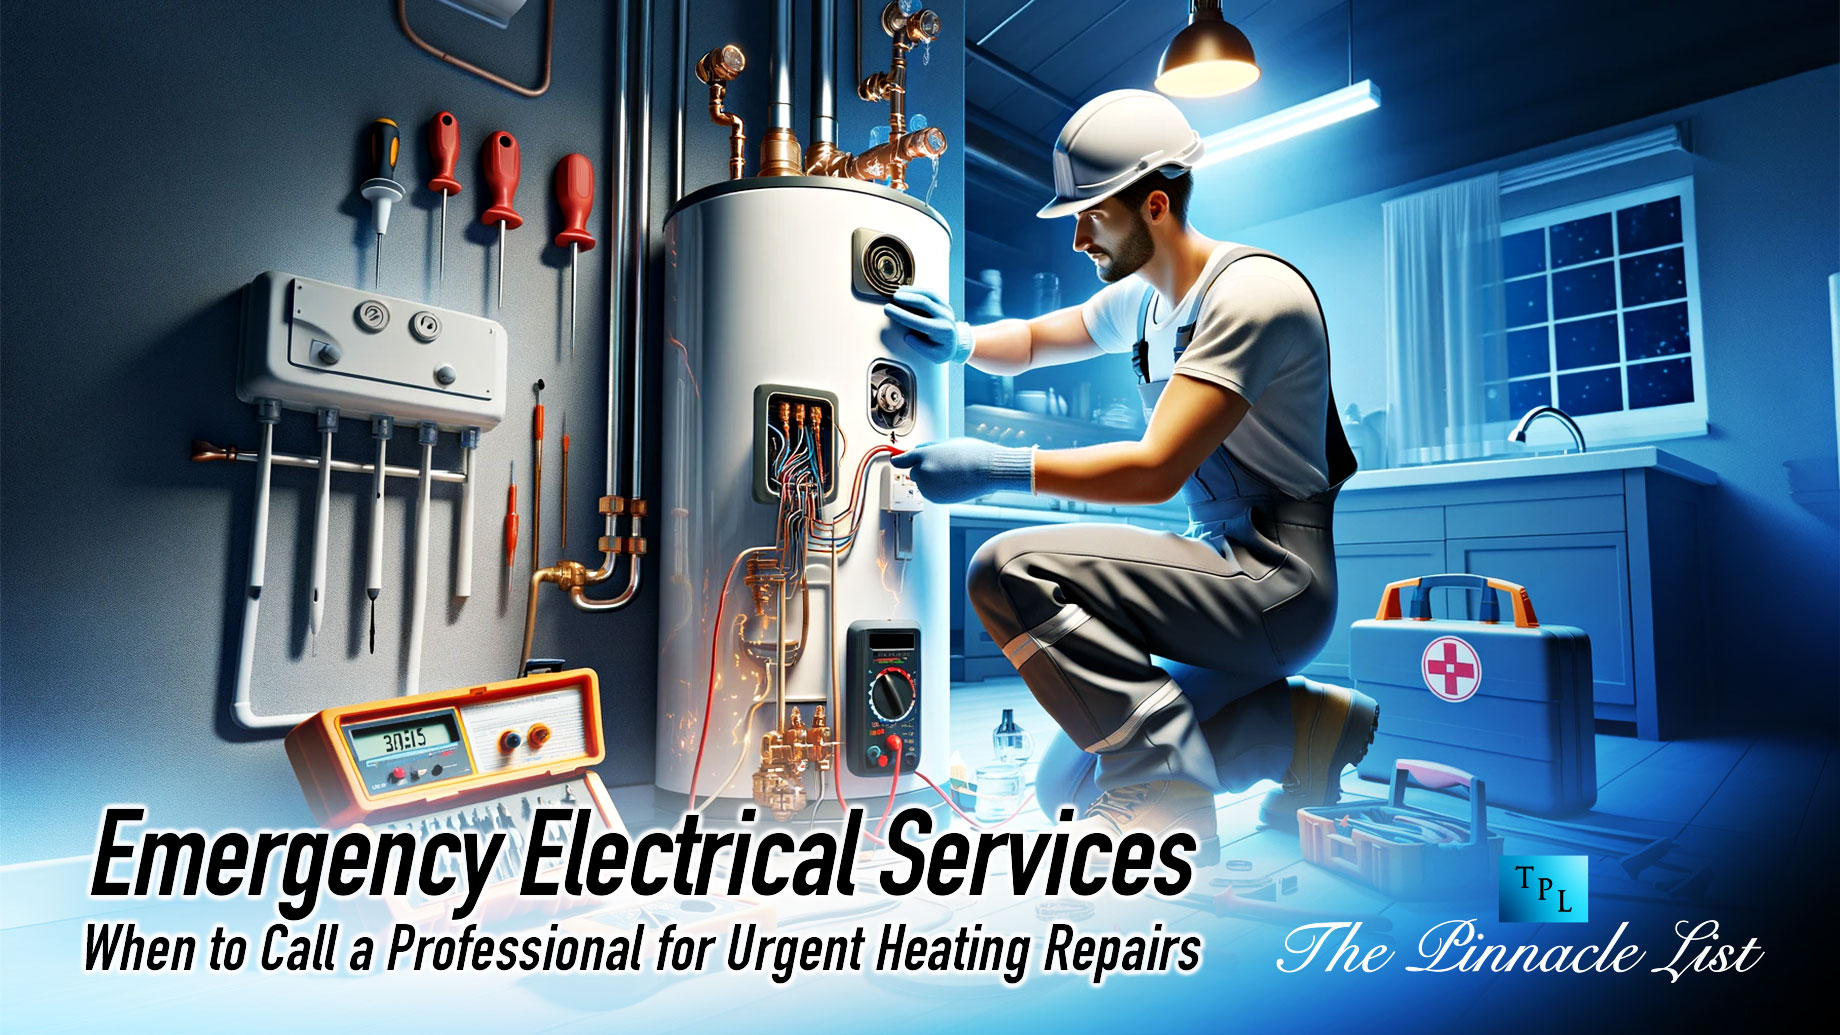 Emergency Electrical Services: When to Call a Professional for Urgent Heating Repairs